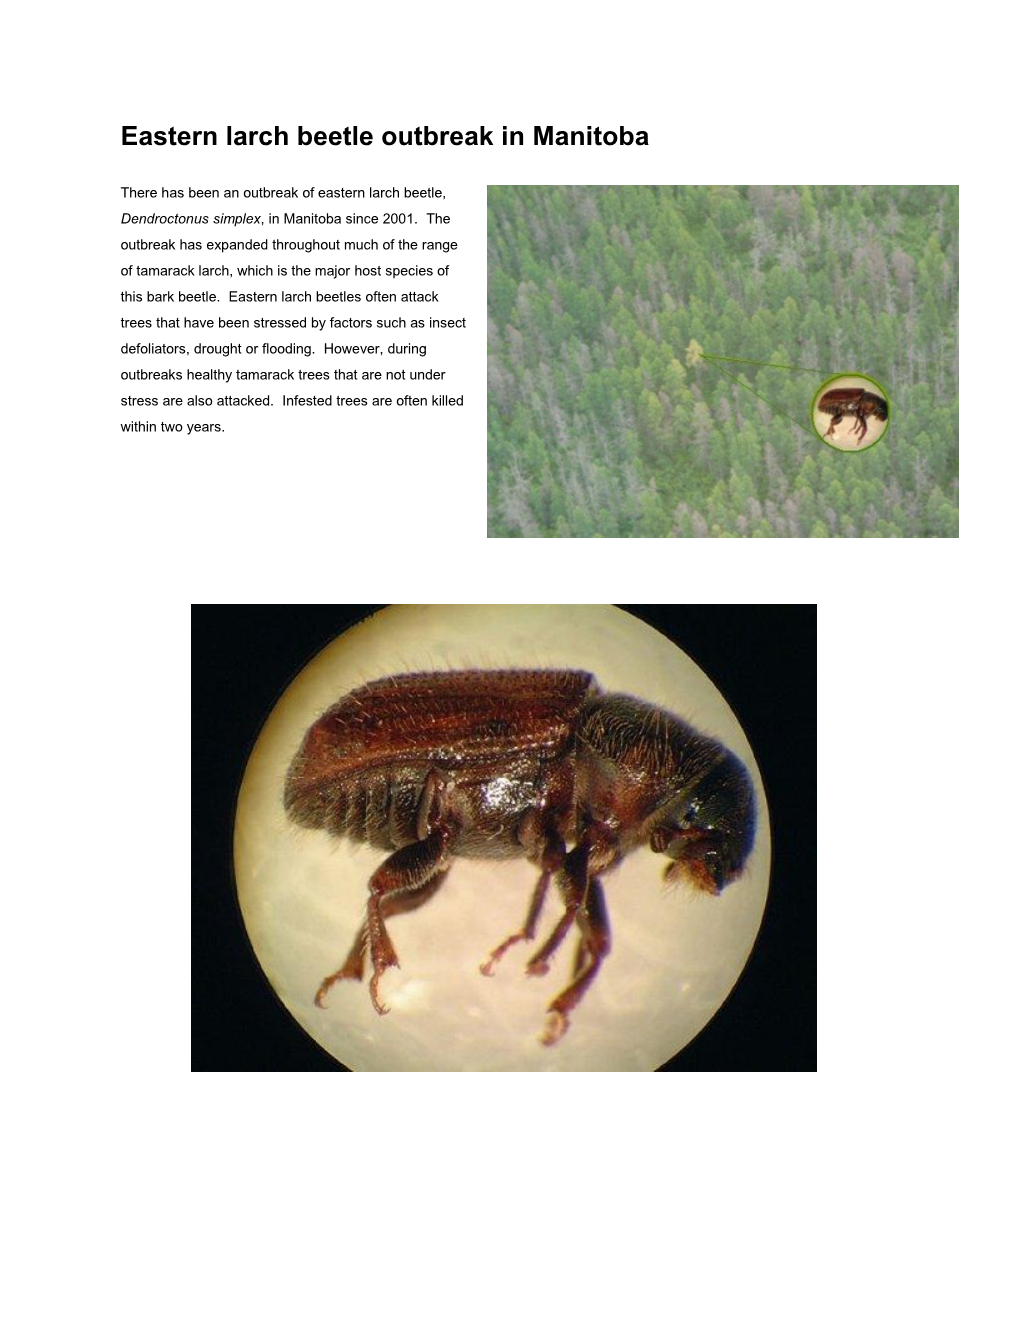 Eastern Larch Beetle Outbreak in Manitoba